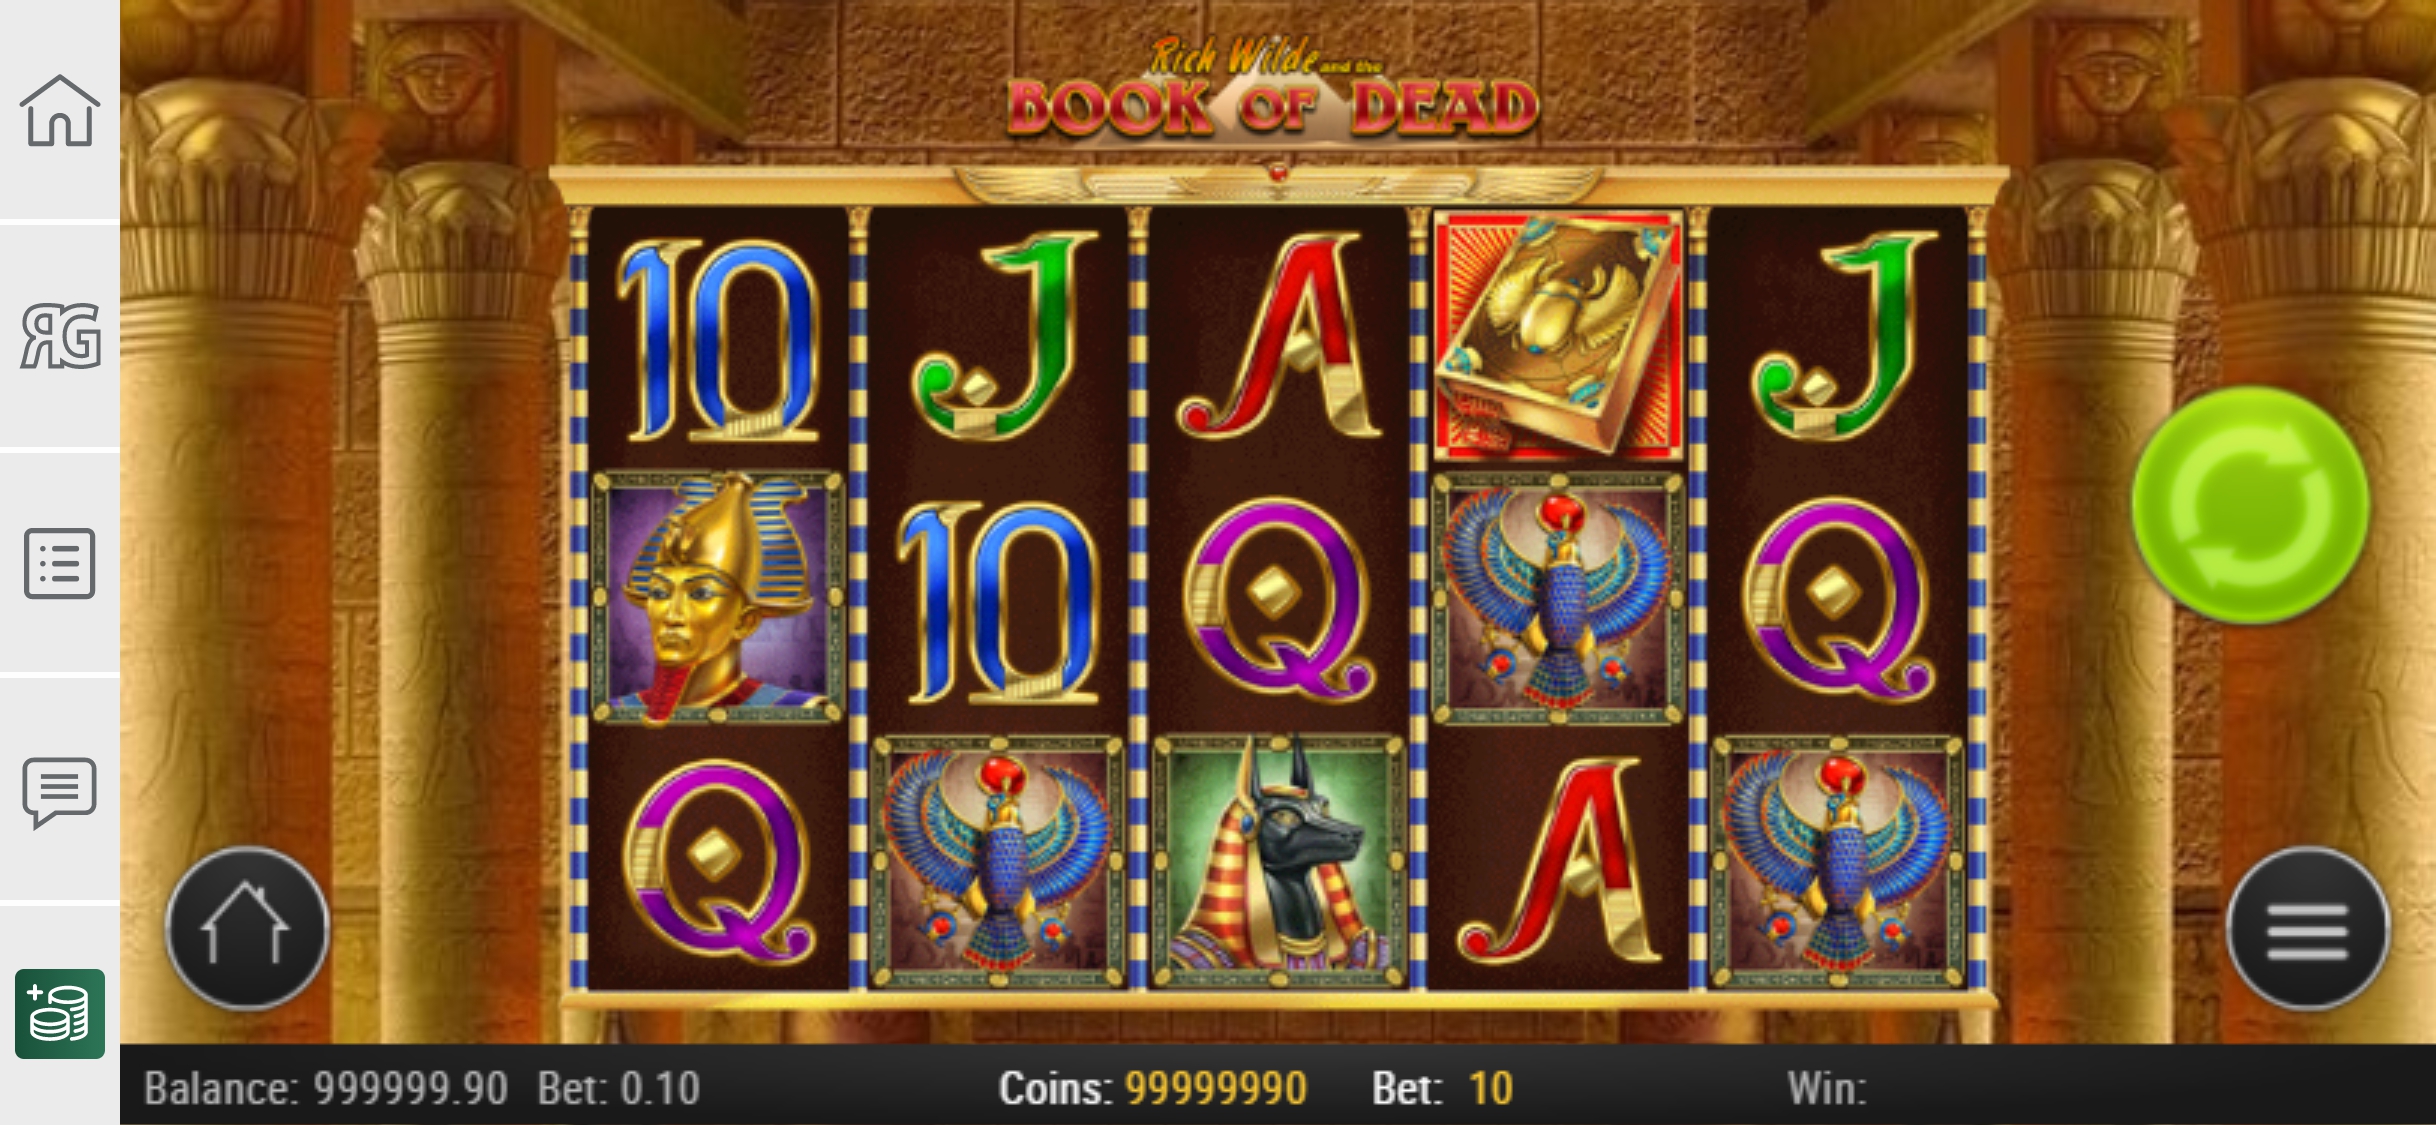 Bitkingz Casino Mobile Slot Games Review